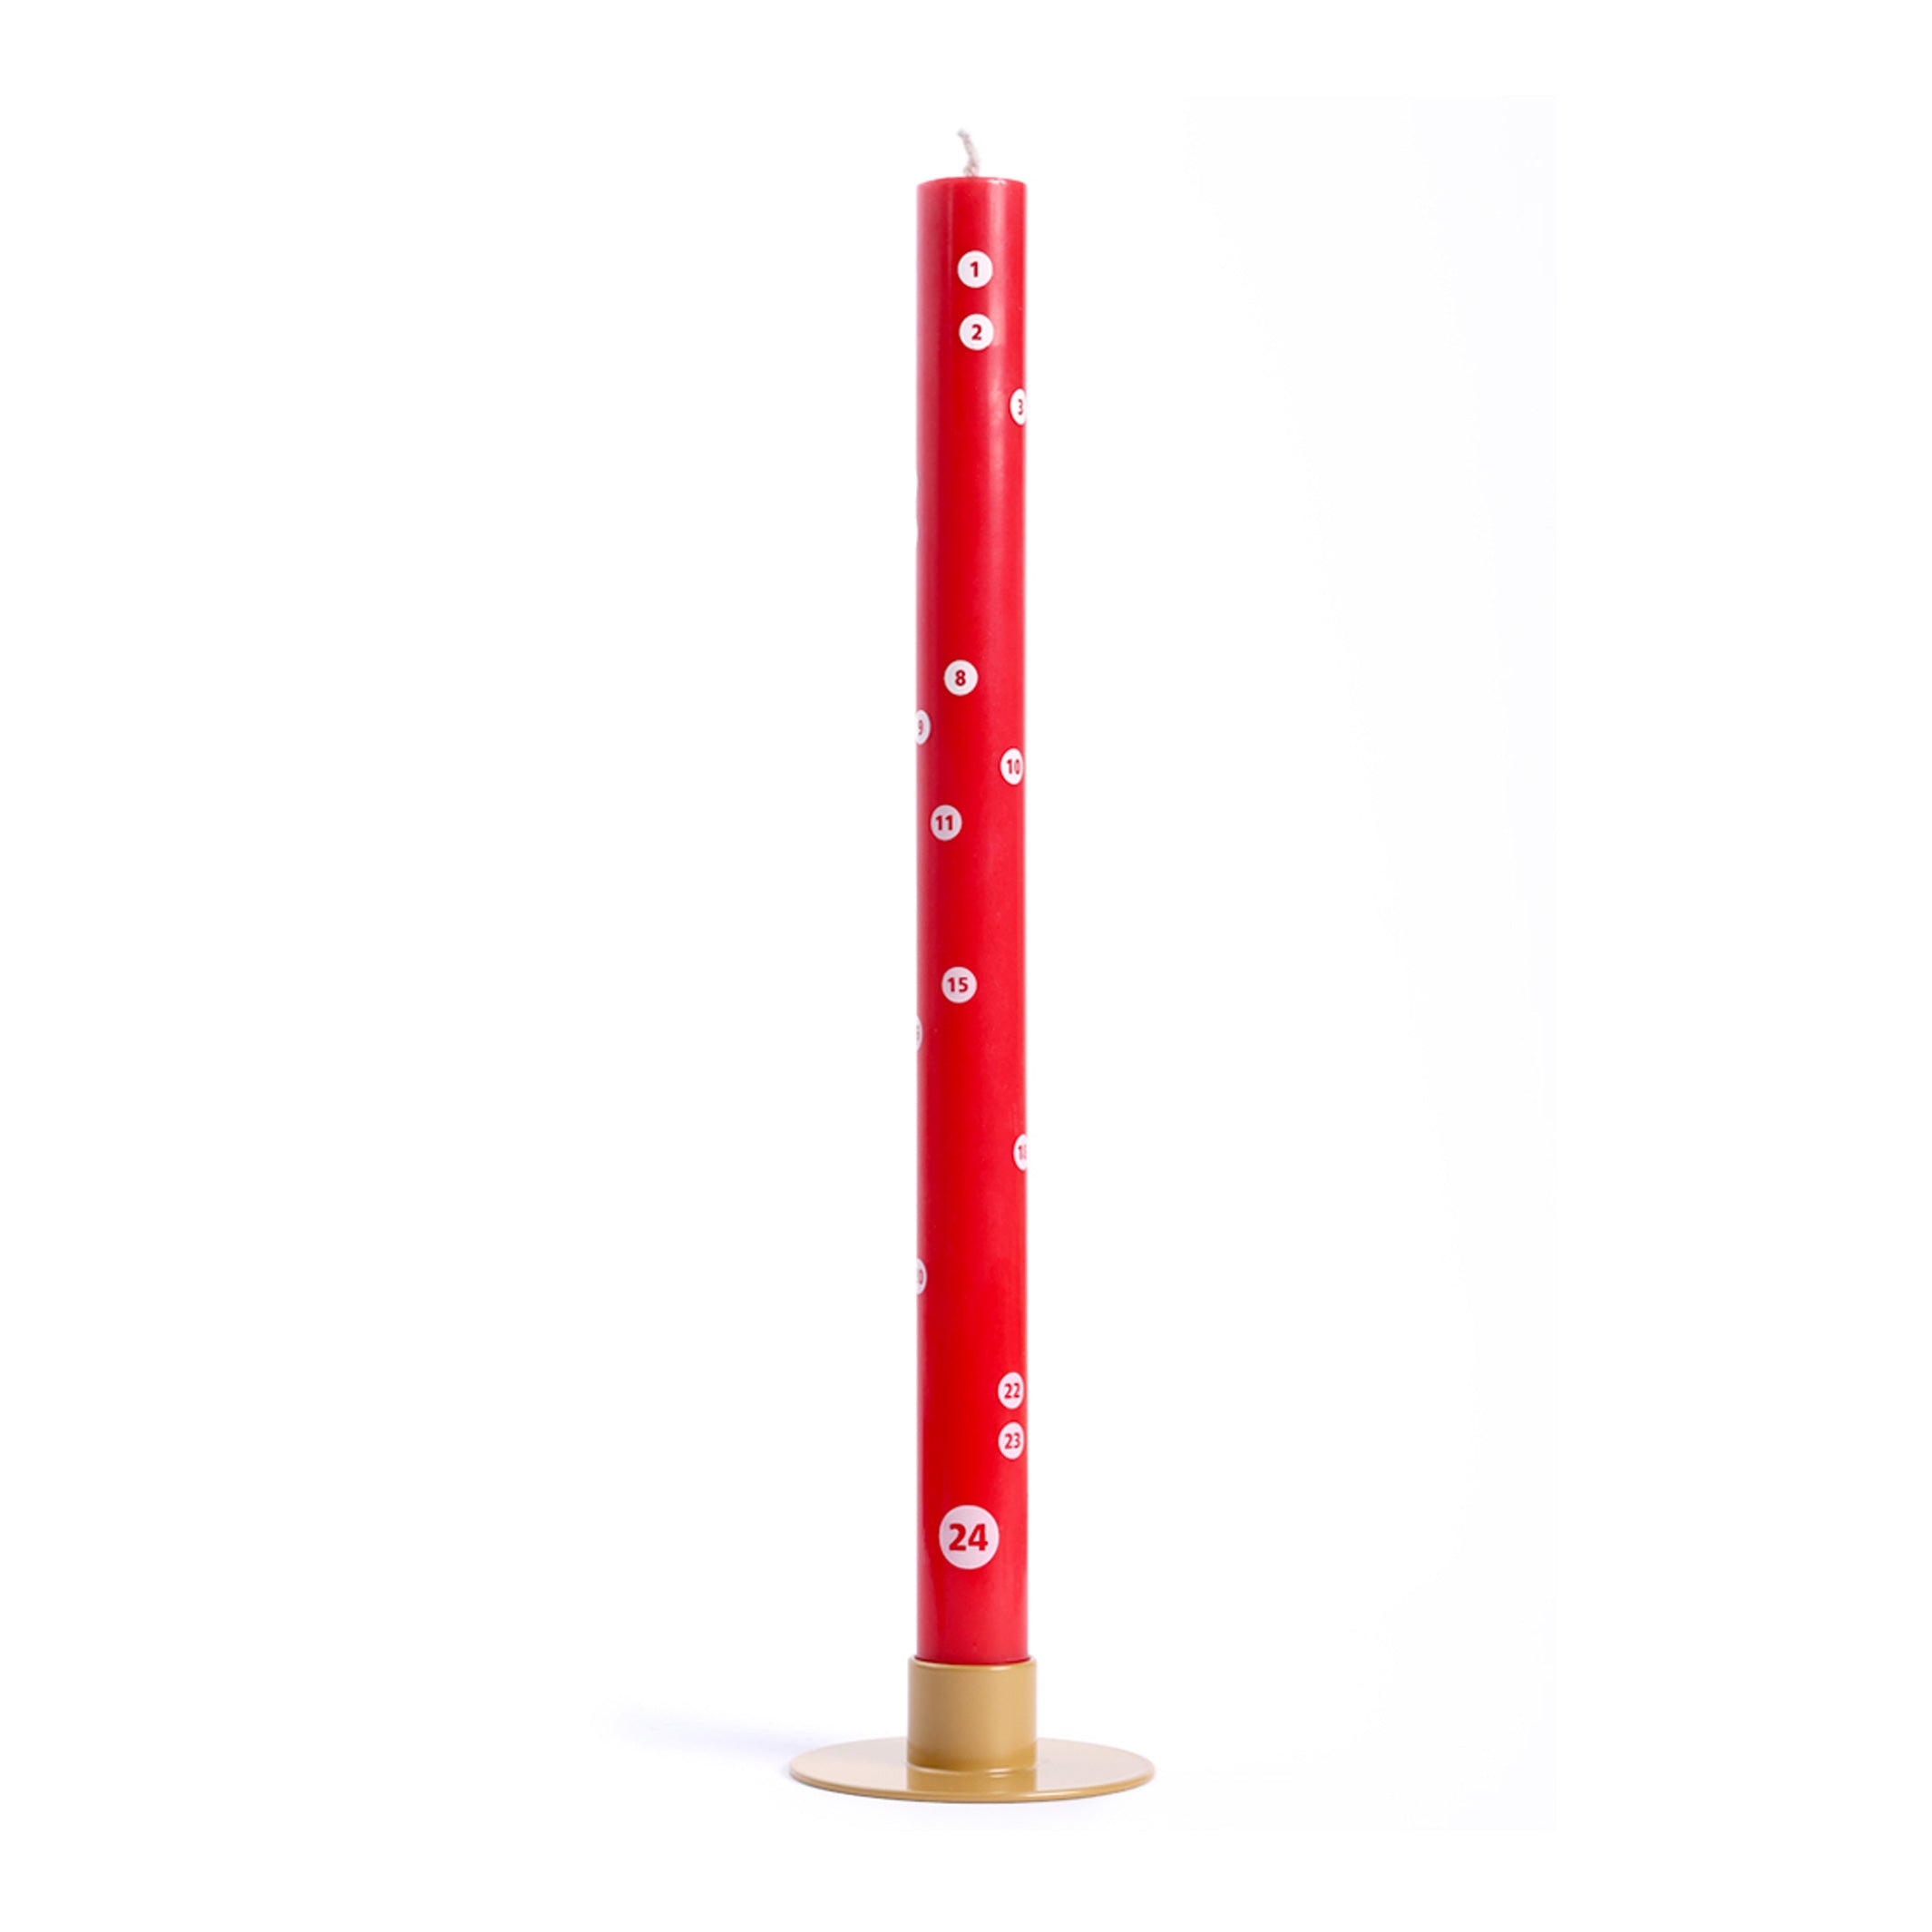 COUNTDOWN ADVENT CANDLE | Red, thin CHRISTMAS CANDLE | 10-11 hrs burn time | not the girl who misses much